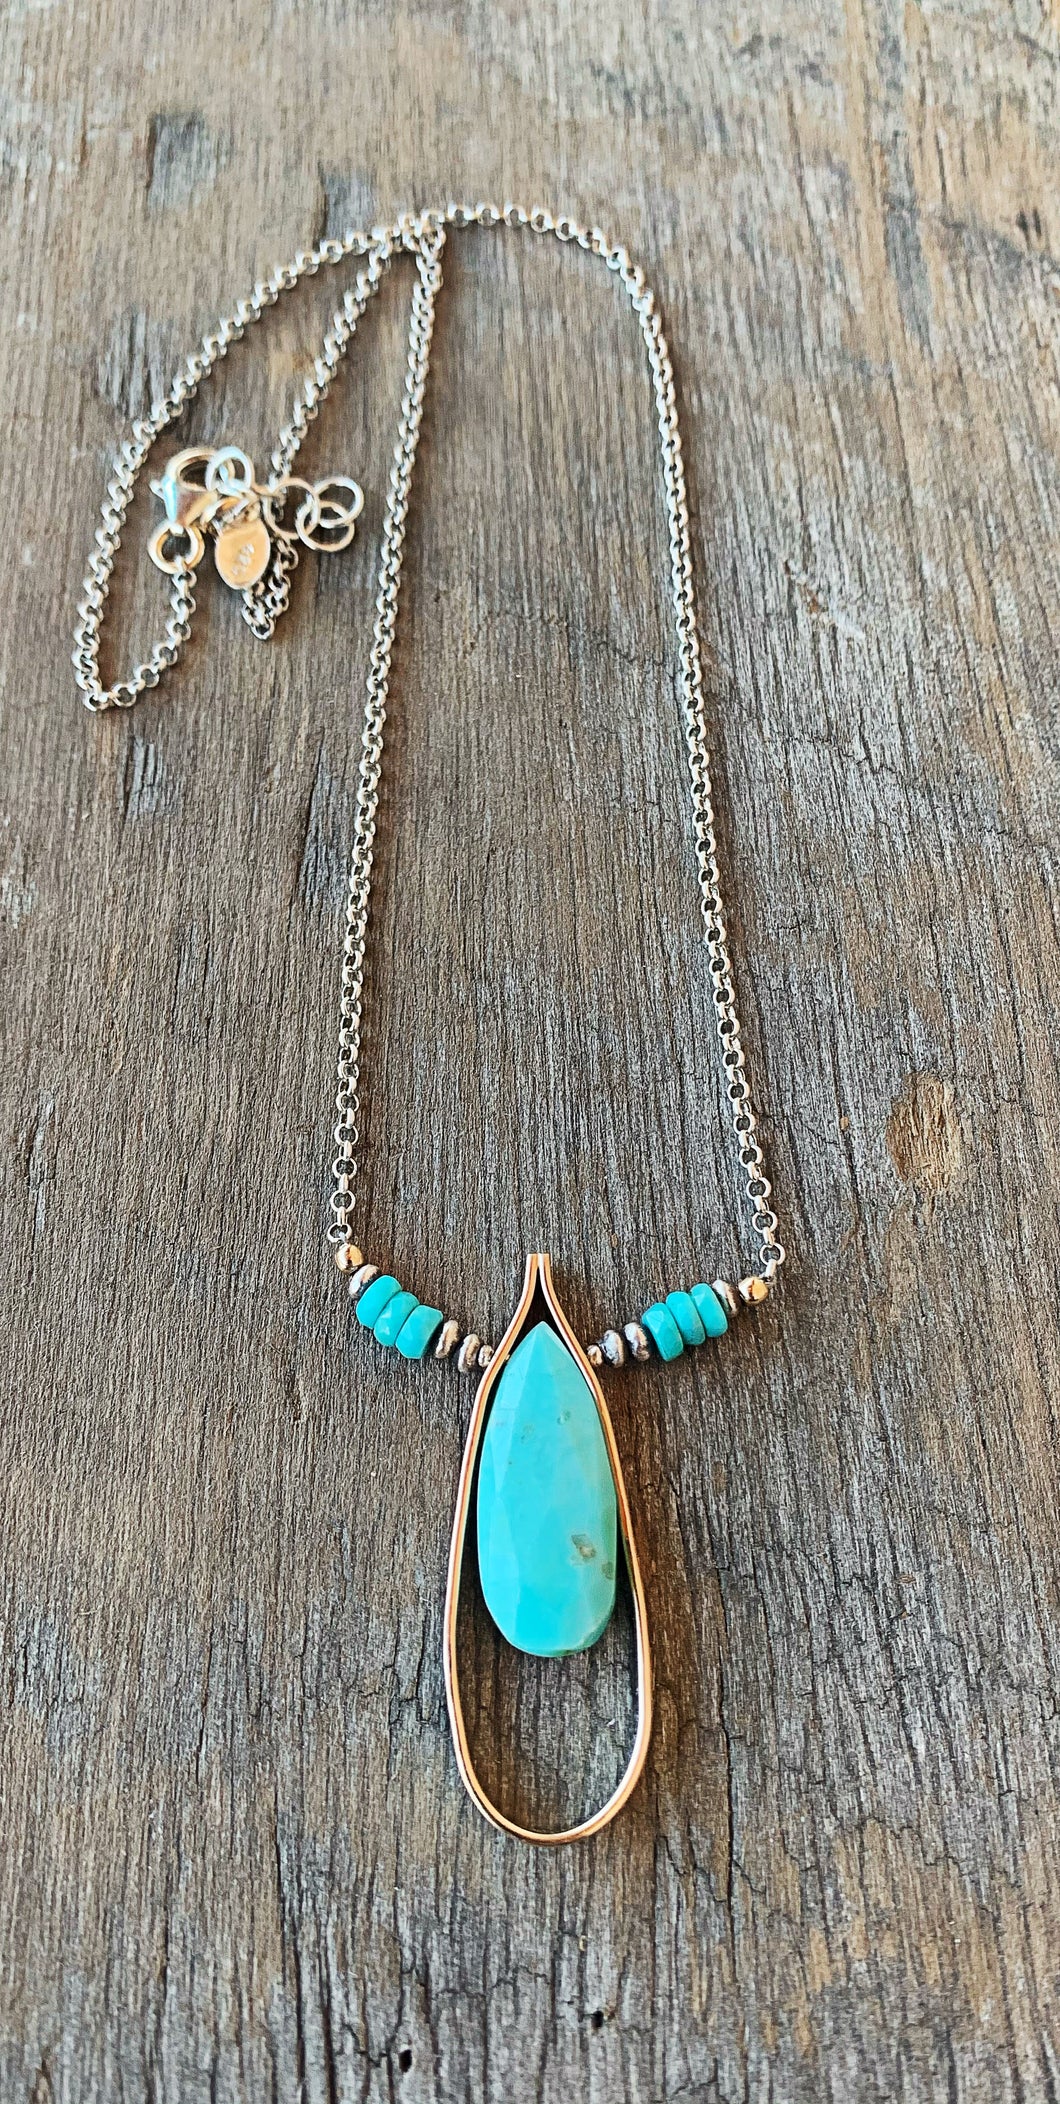 Faceted Turquoise Tear Drop Necklace